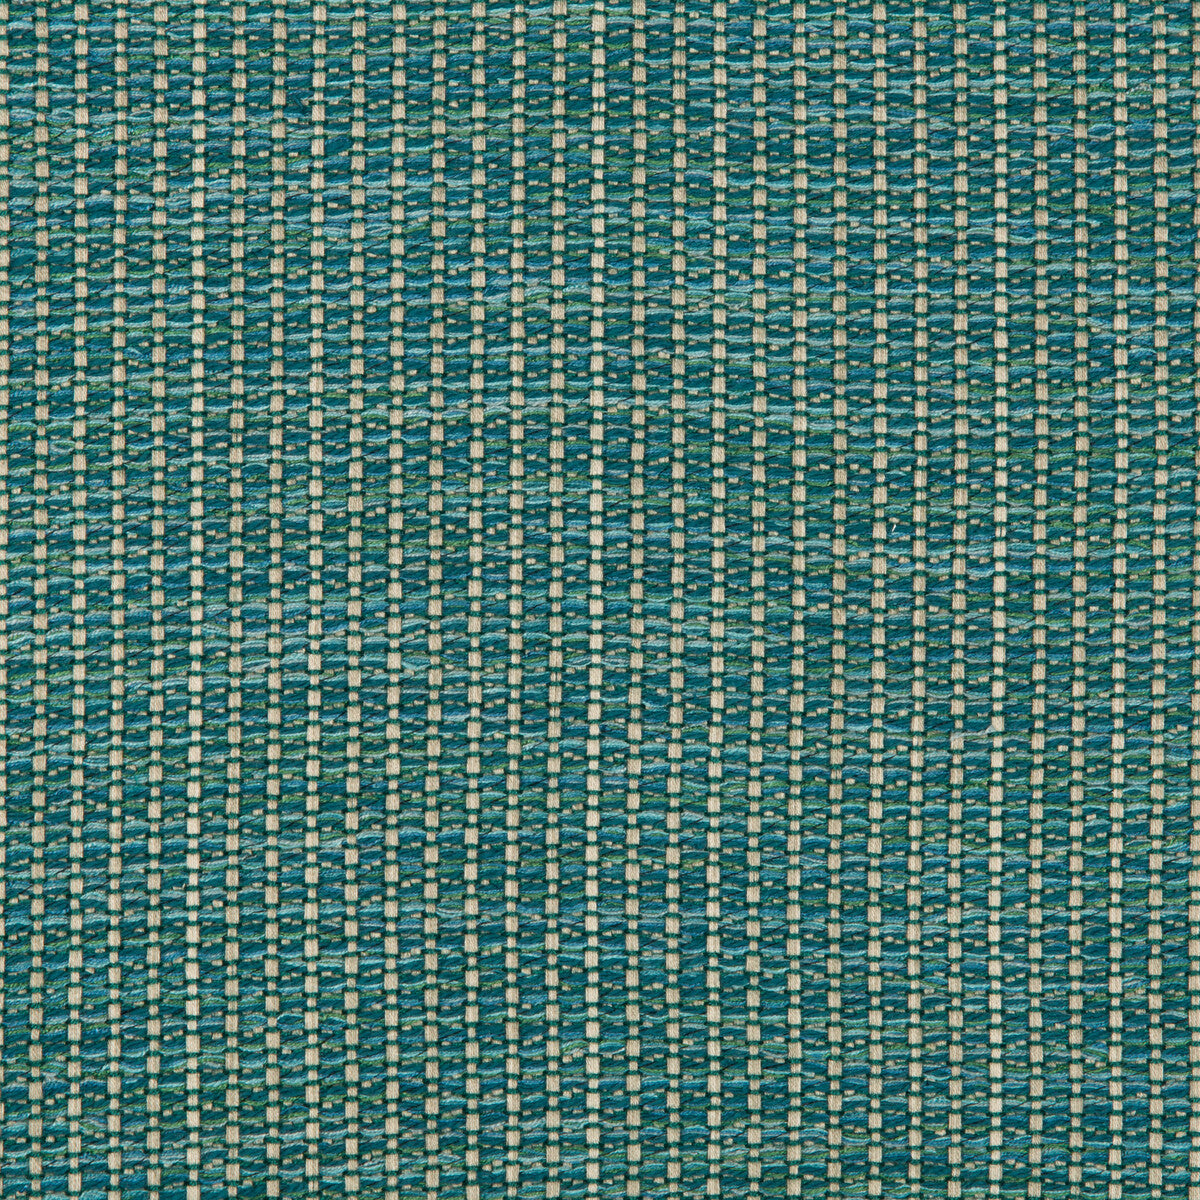 Kravet Design fabric in 35123-35 color - pattern 35123.35.0 - by Kravet Design in the Performance Crypton Home collection